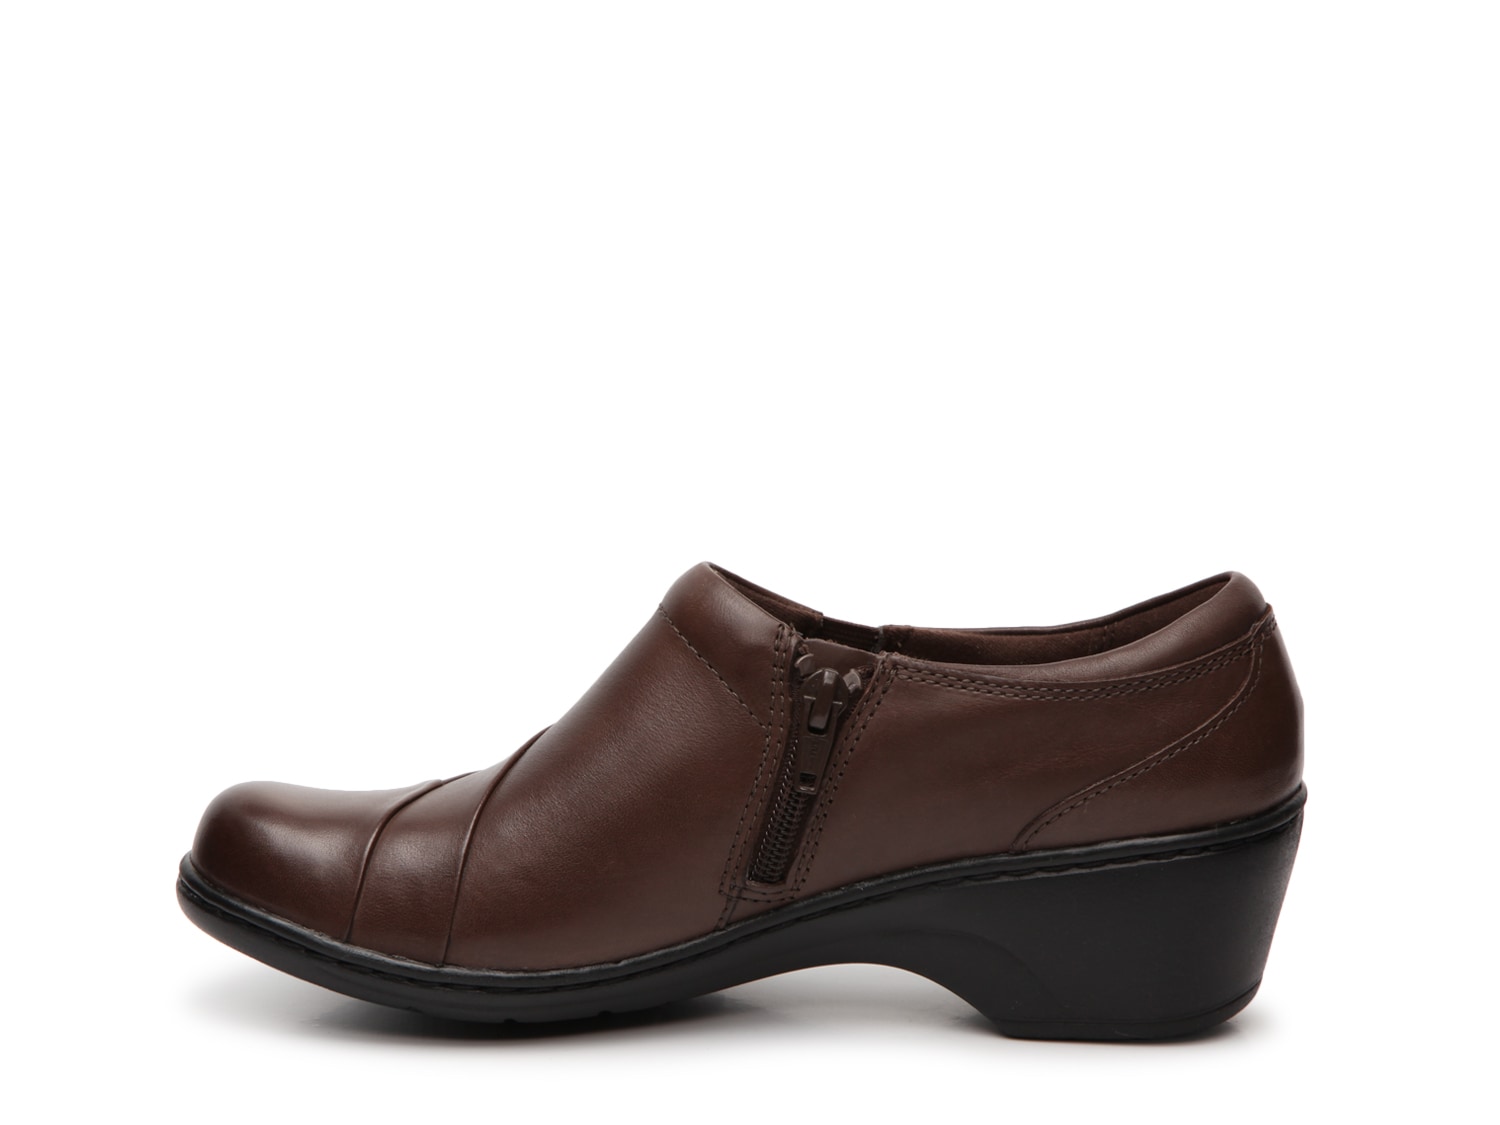 clarks channing ann leather womens casual shoes